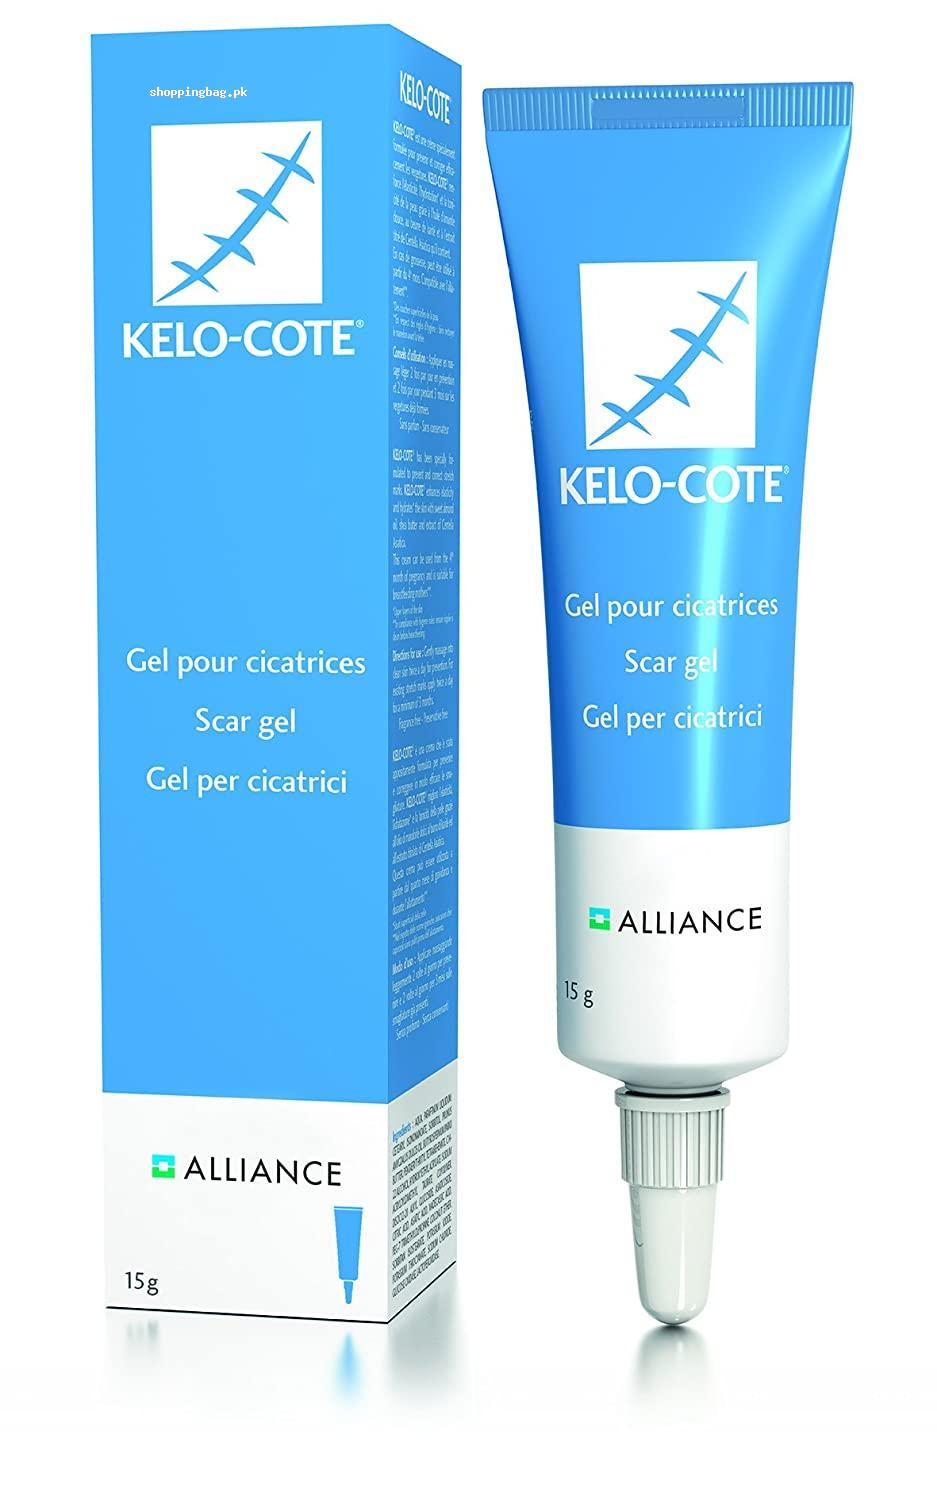 Sinclair Gel for Scars by Kelo-Cote - 15g